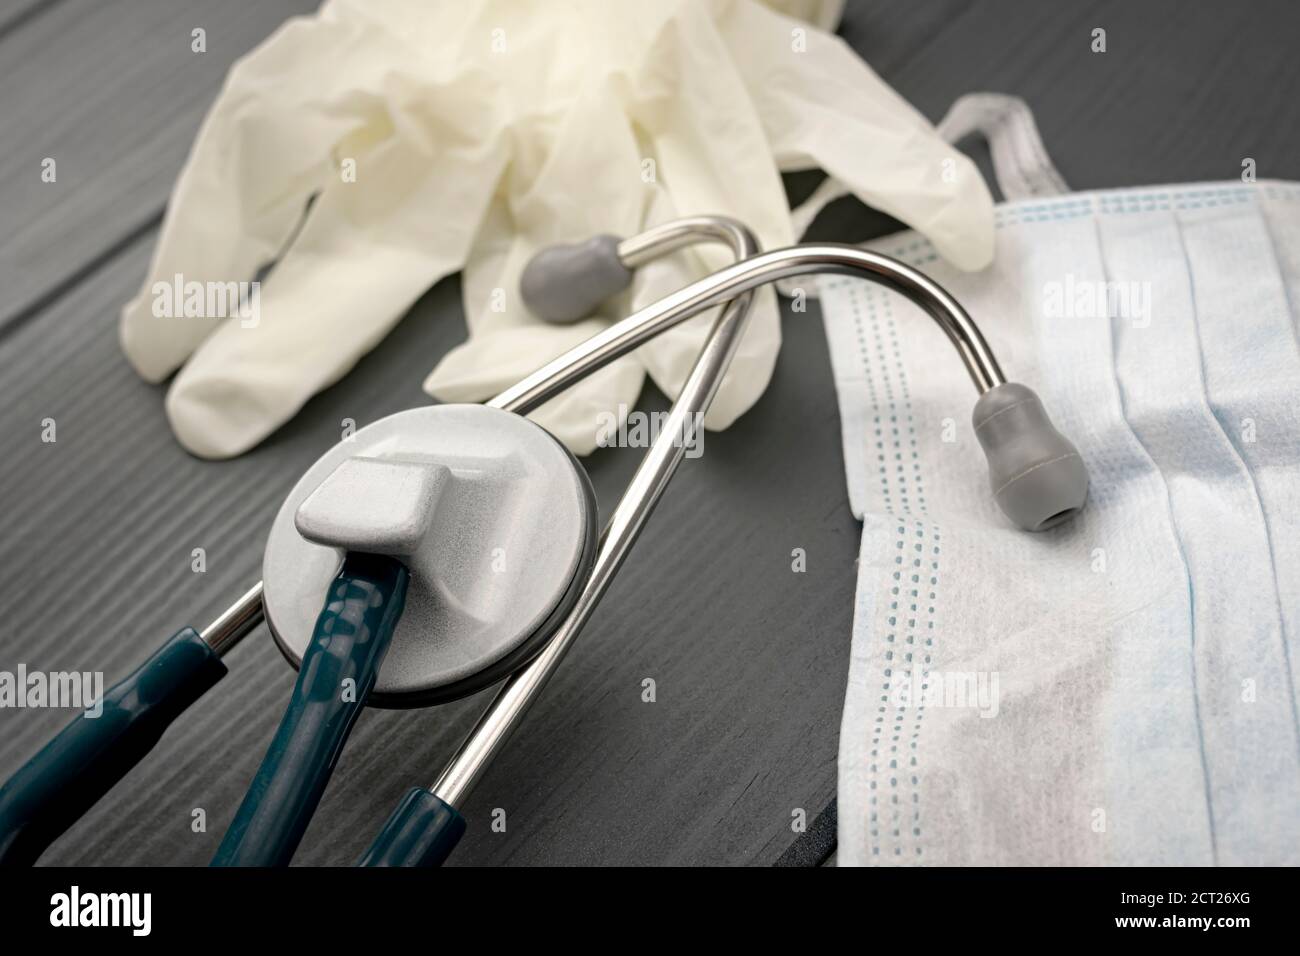 Personal protective equipment for doctors and nurses in a Hospital for the detection of contagious diseases such as coronavirus Stock Photo